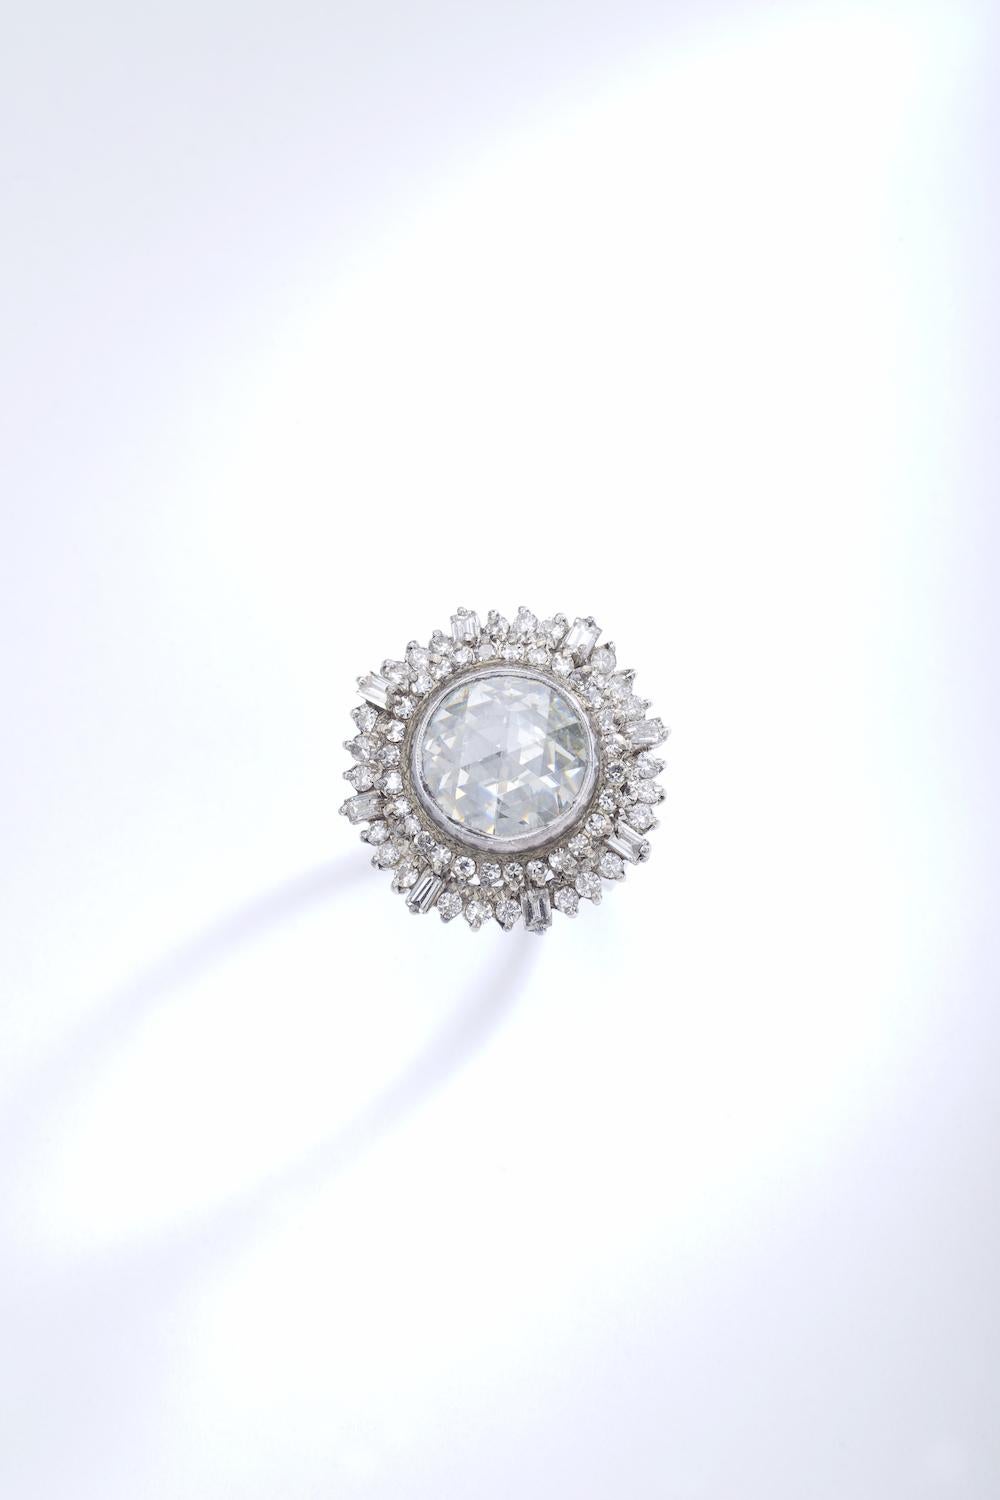 Rare and Collectible! This Antique Rose cut Diamond is clean and white. The mounting is an Indian work with round and baguette cut diamond.
The diameter of the central diamond is approximately 13.50 millimeters. Circa 1950.